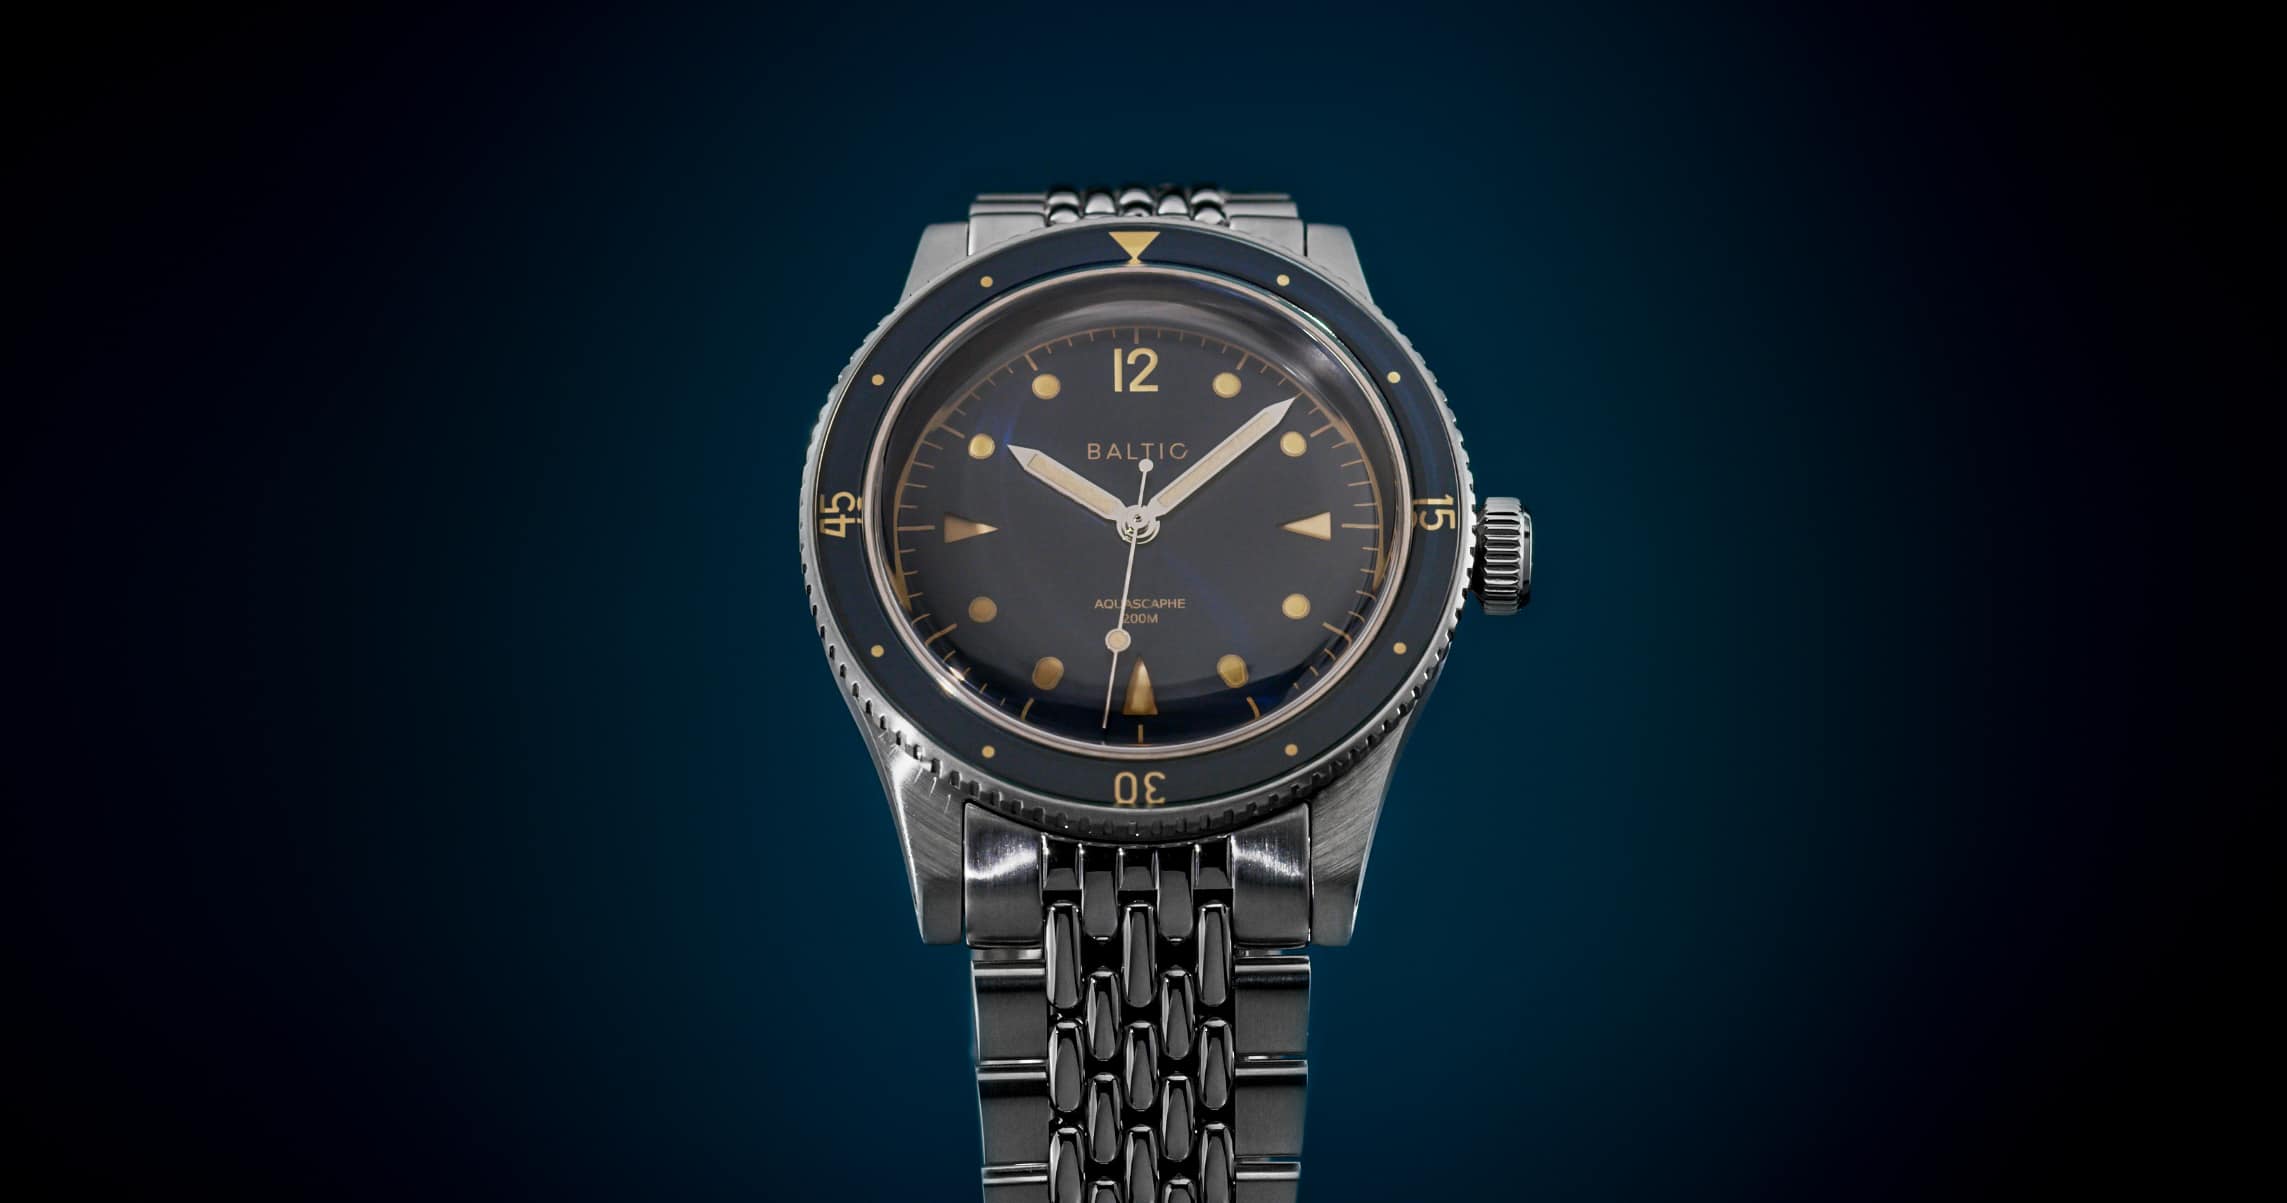 Introducing the Aquascaphe, Baltic’s First Vintage-Inspired Dive Watch